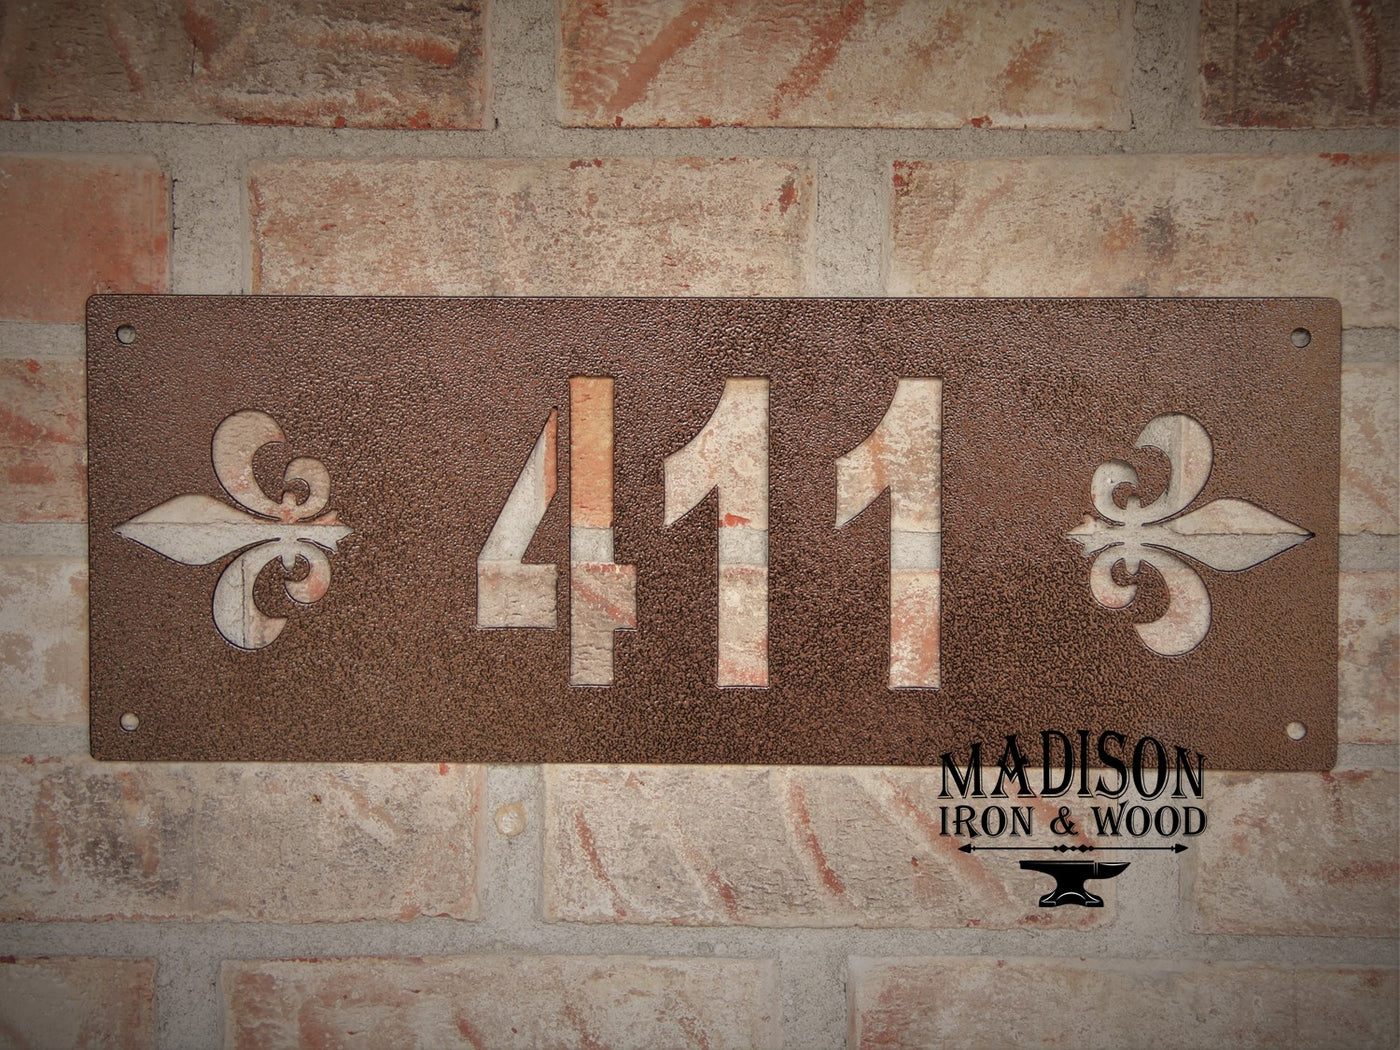 Personalized Fleur De Lis Metal Sign with Street Address Numbers, House Numbers - Madison Iron and Wood - Wall Art - metal outdoor decor - Steel deocrations - american made products - veteran owned business products - fencing decorations - fencing supplies - custom wall decorations - personalized wall signs - steel - decorative post caps - steel post caps - metal post caps - brackets - structural brackets - home improvement - easter - easter decorations - easter gift - easter yard decor